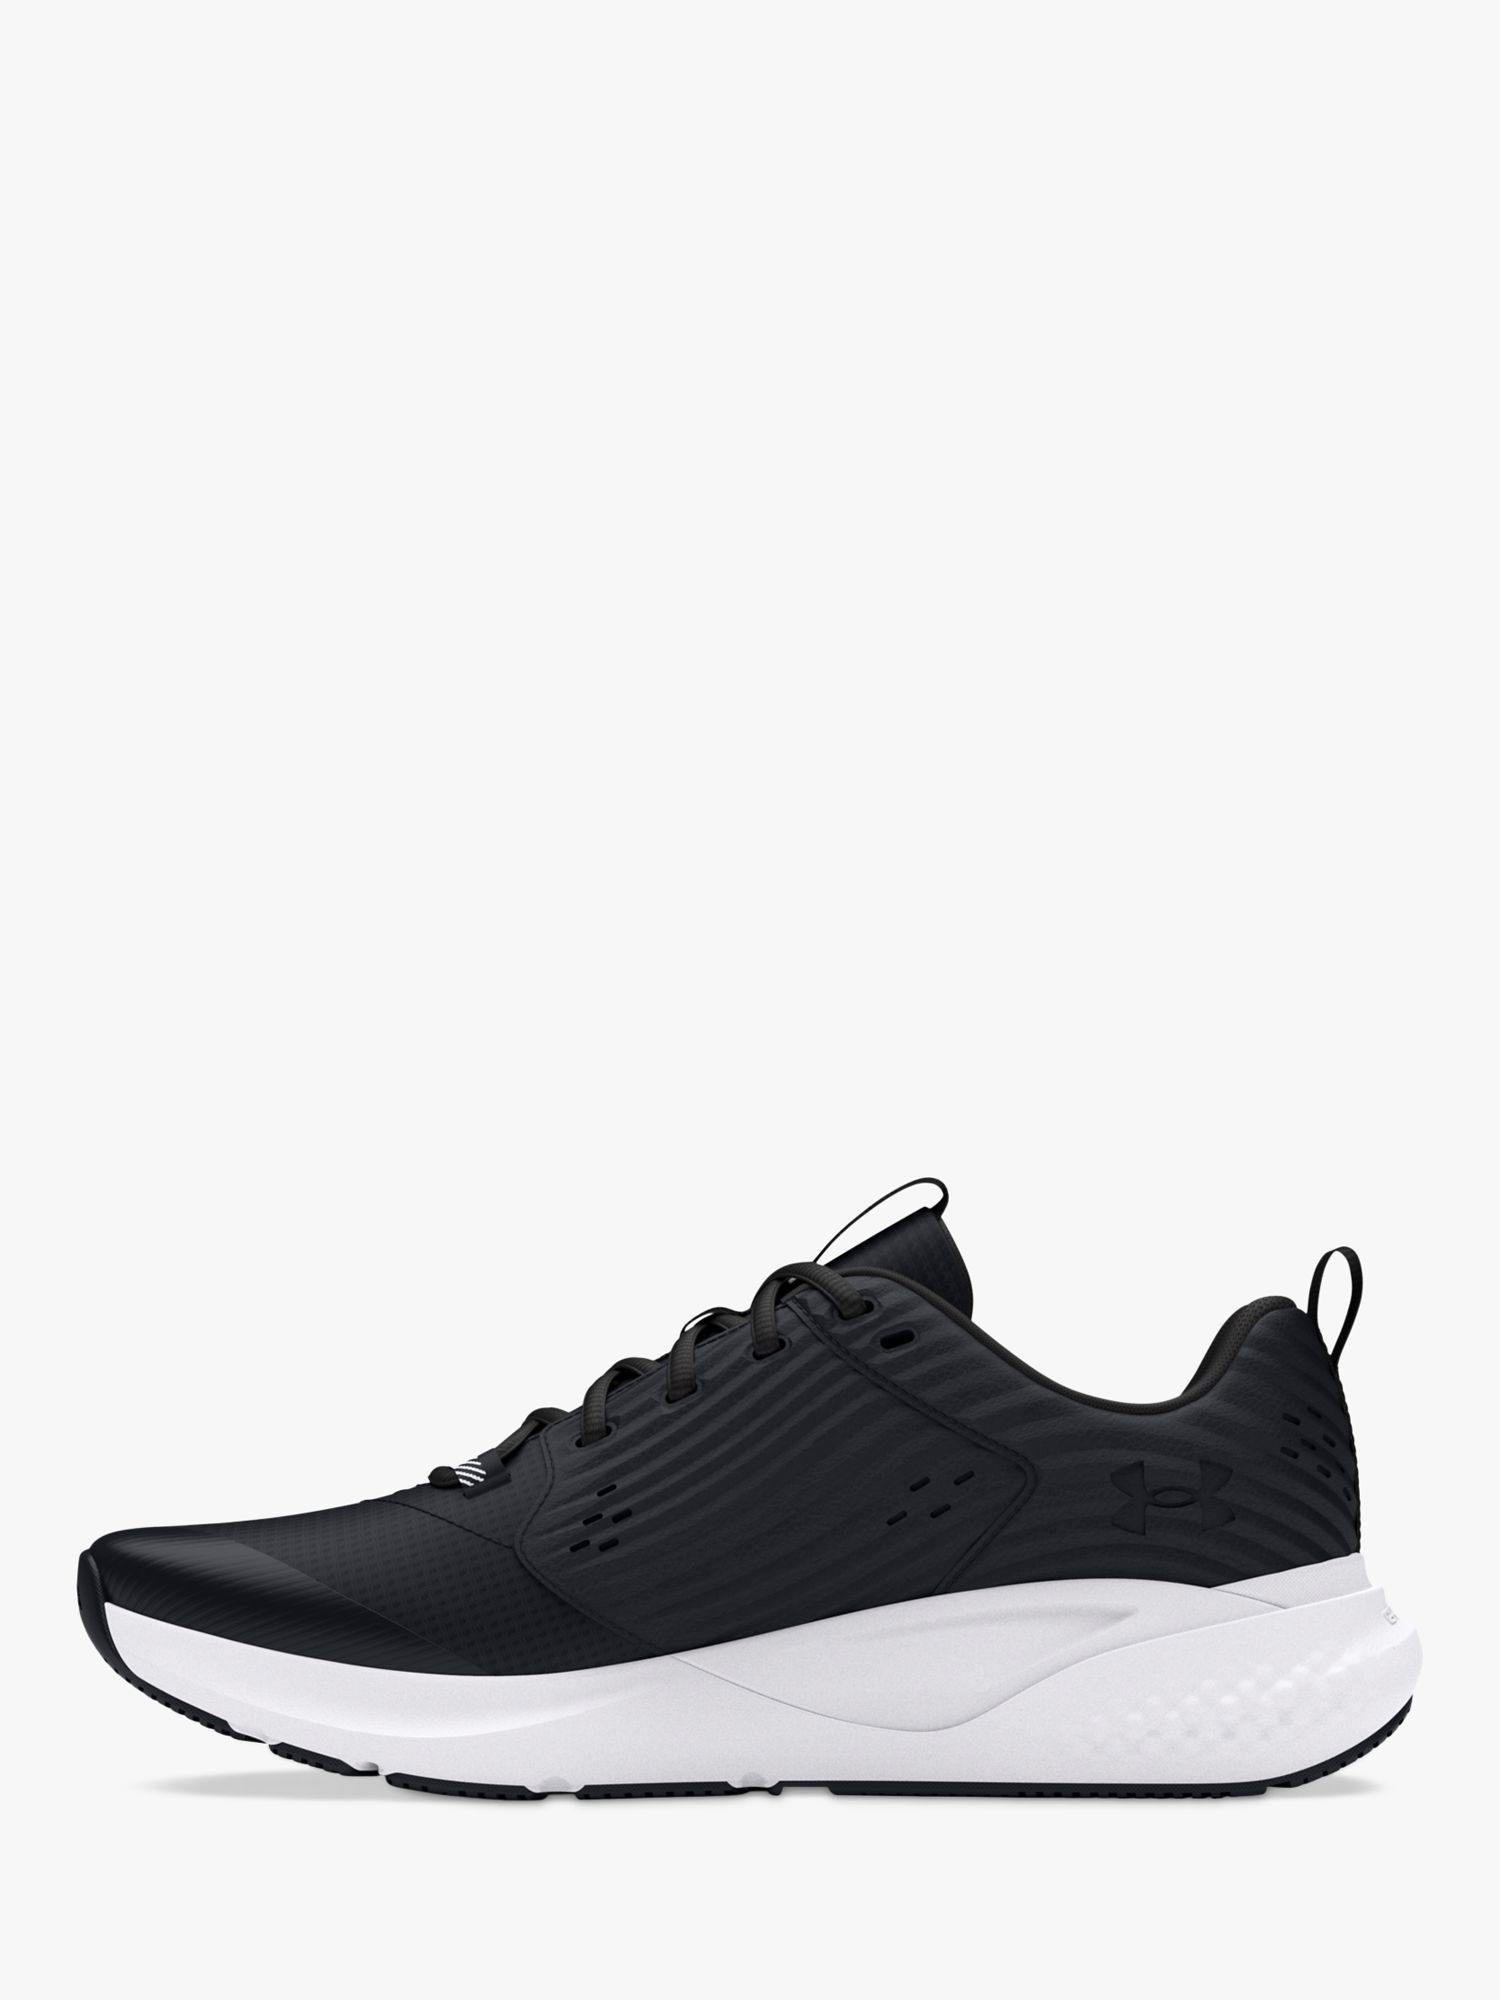 Buy Under Armour Charged Men's Running Shoes, Black/White Online at johnlewis.com